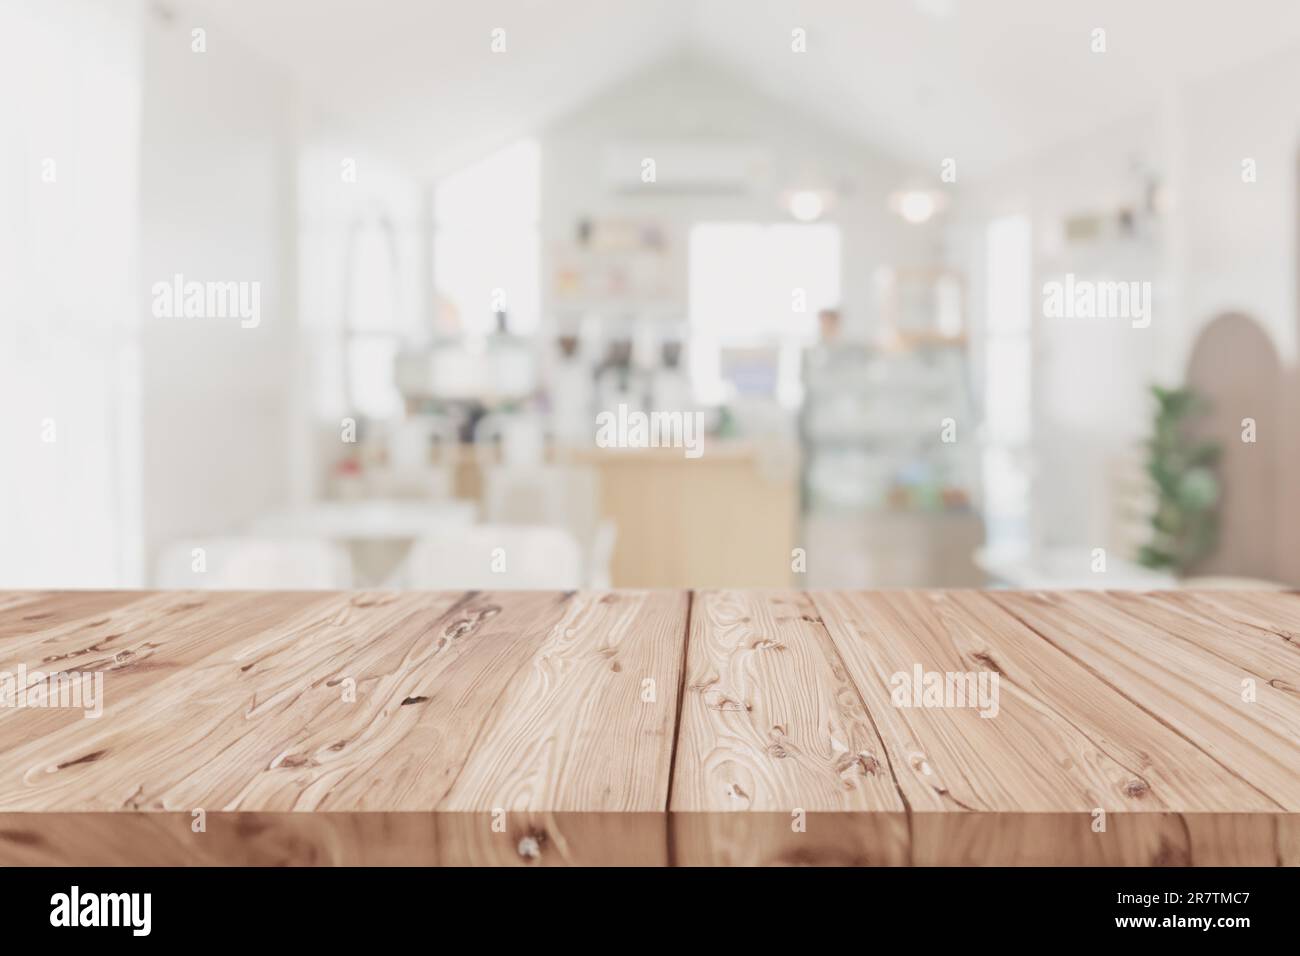 Wood table on blur coffee shop background clean bright light foreground Mock up for montage products display Stock Photo